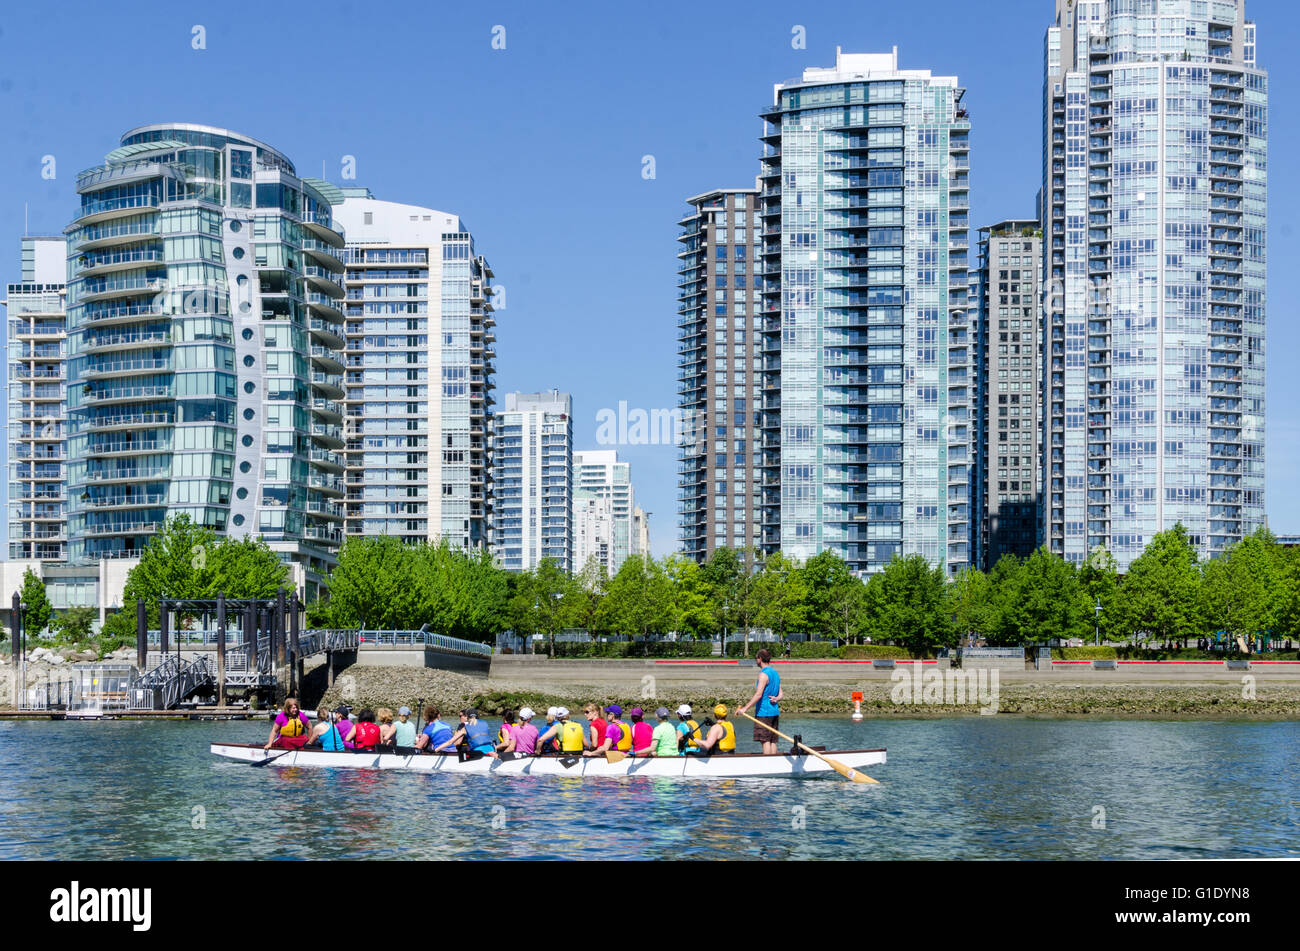 A portrait of the city and the urban landscape of Vancouver, British Columbia, Canada – False Creek Stock Photo